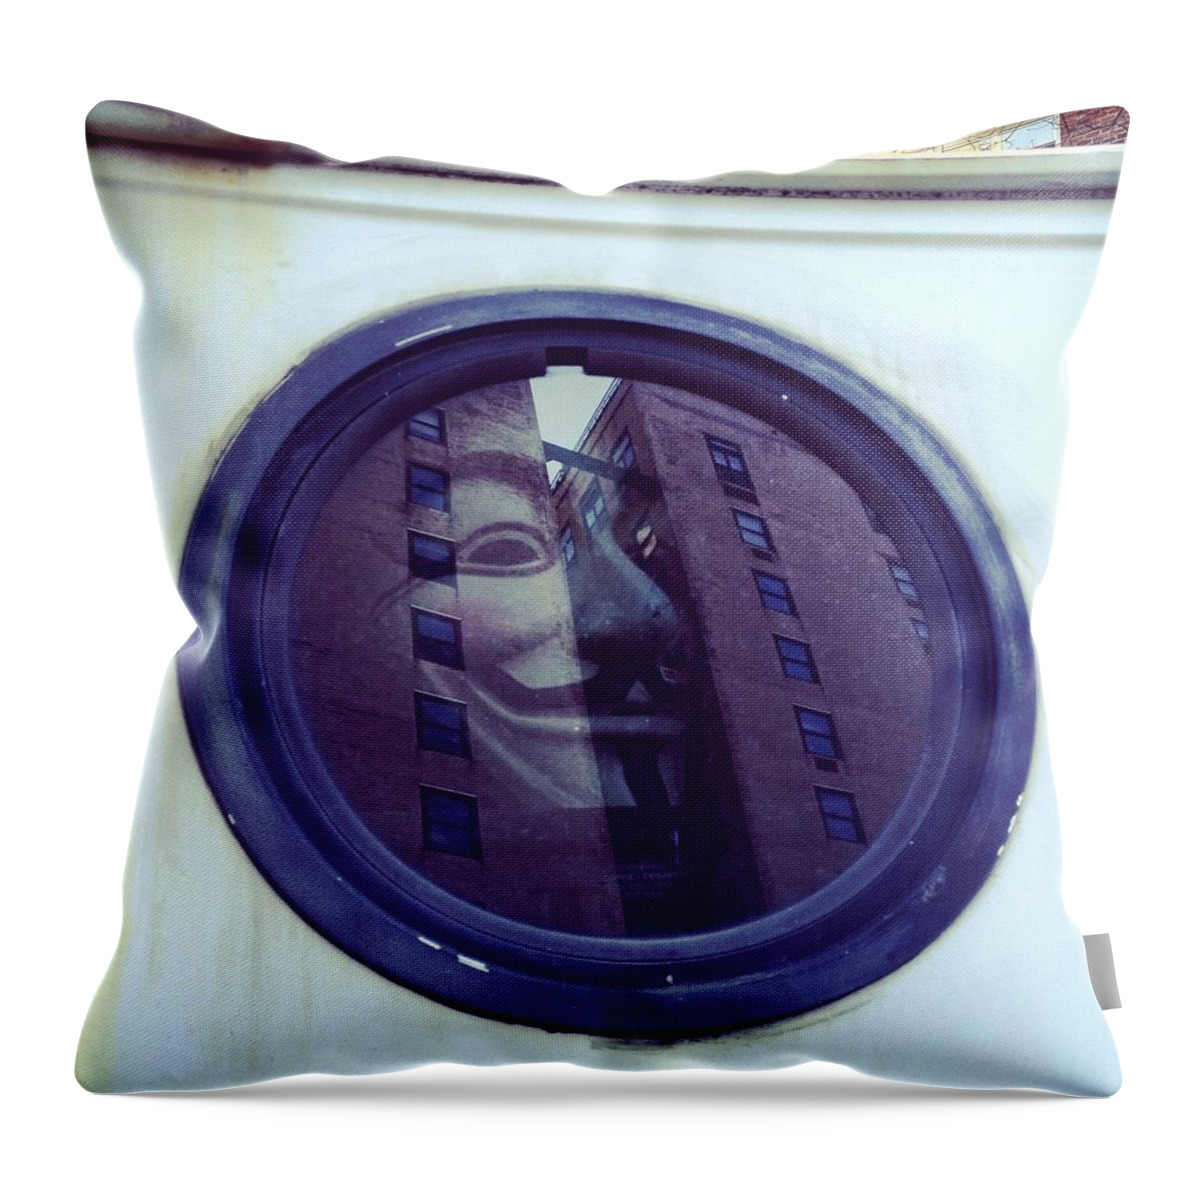 Nyc Throw Pillow featuring the photograph V's Van View by Natasha Marco